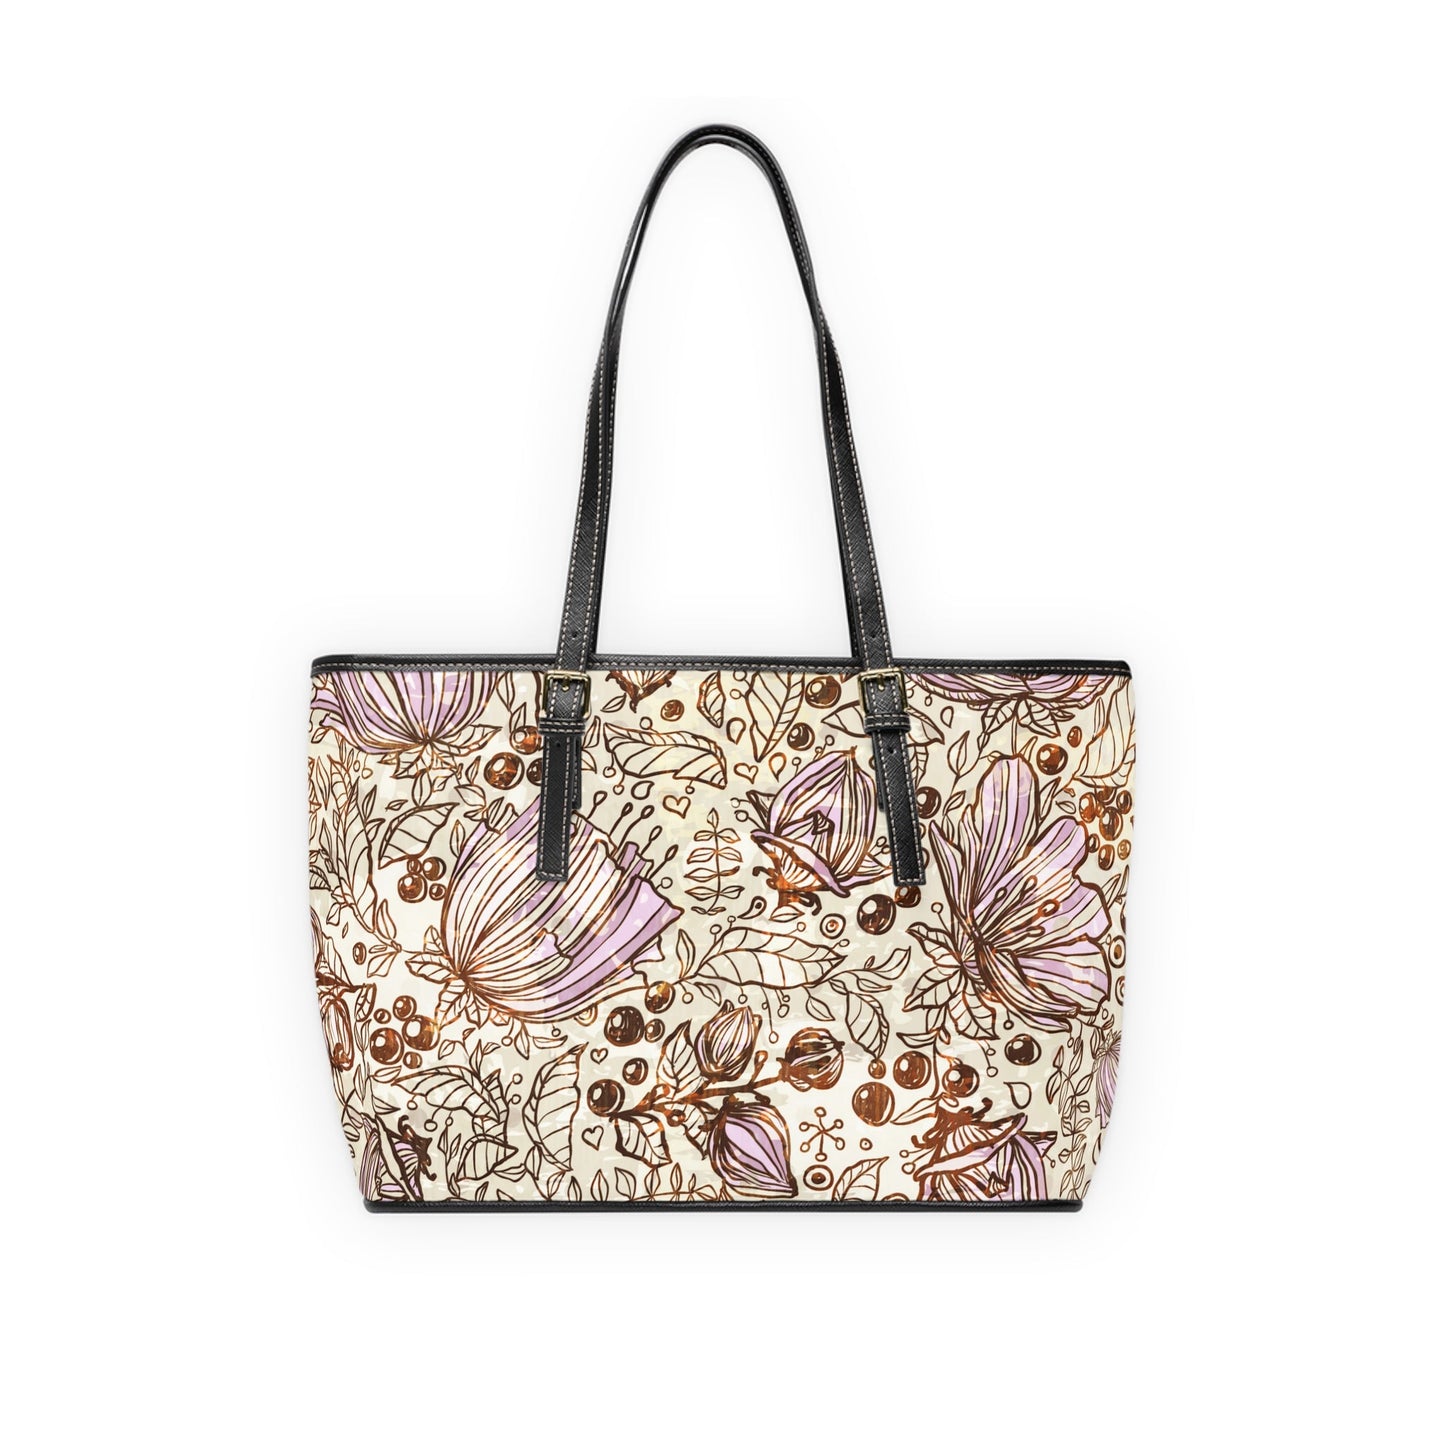 Bags - Very Floral PU Leather Shoulder Bag